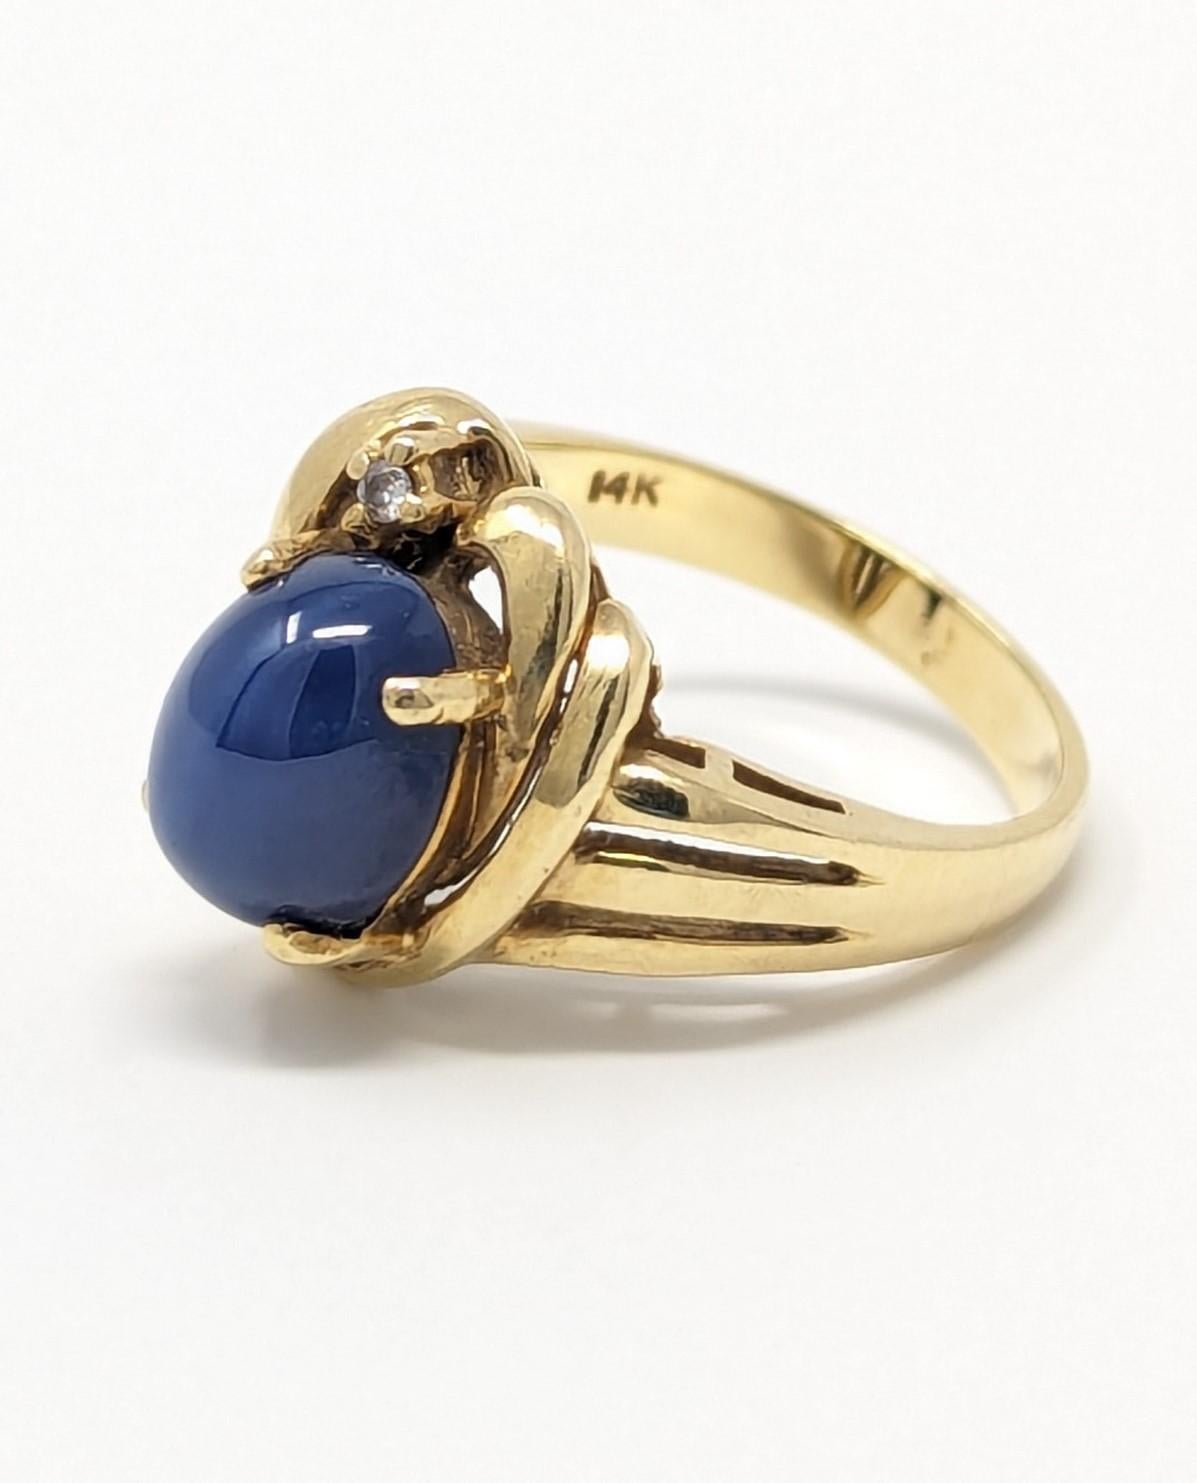 14k Blue Star Sapphire Ring with Diamond set in Solid Yellow Gold Size 6.25 In Good Condition For Sale In Greer, SC